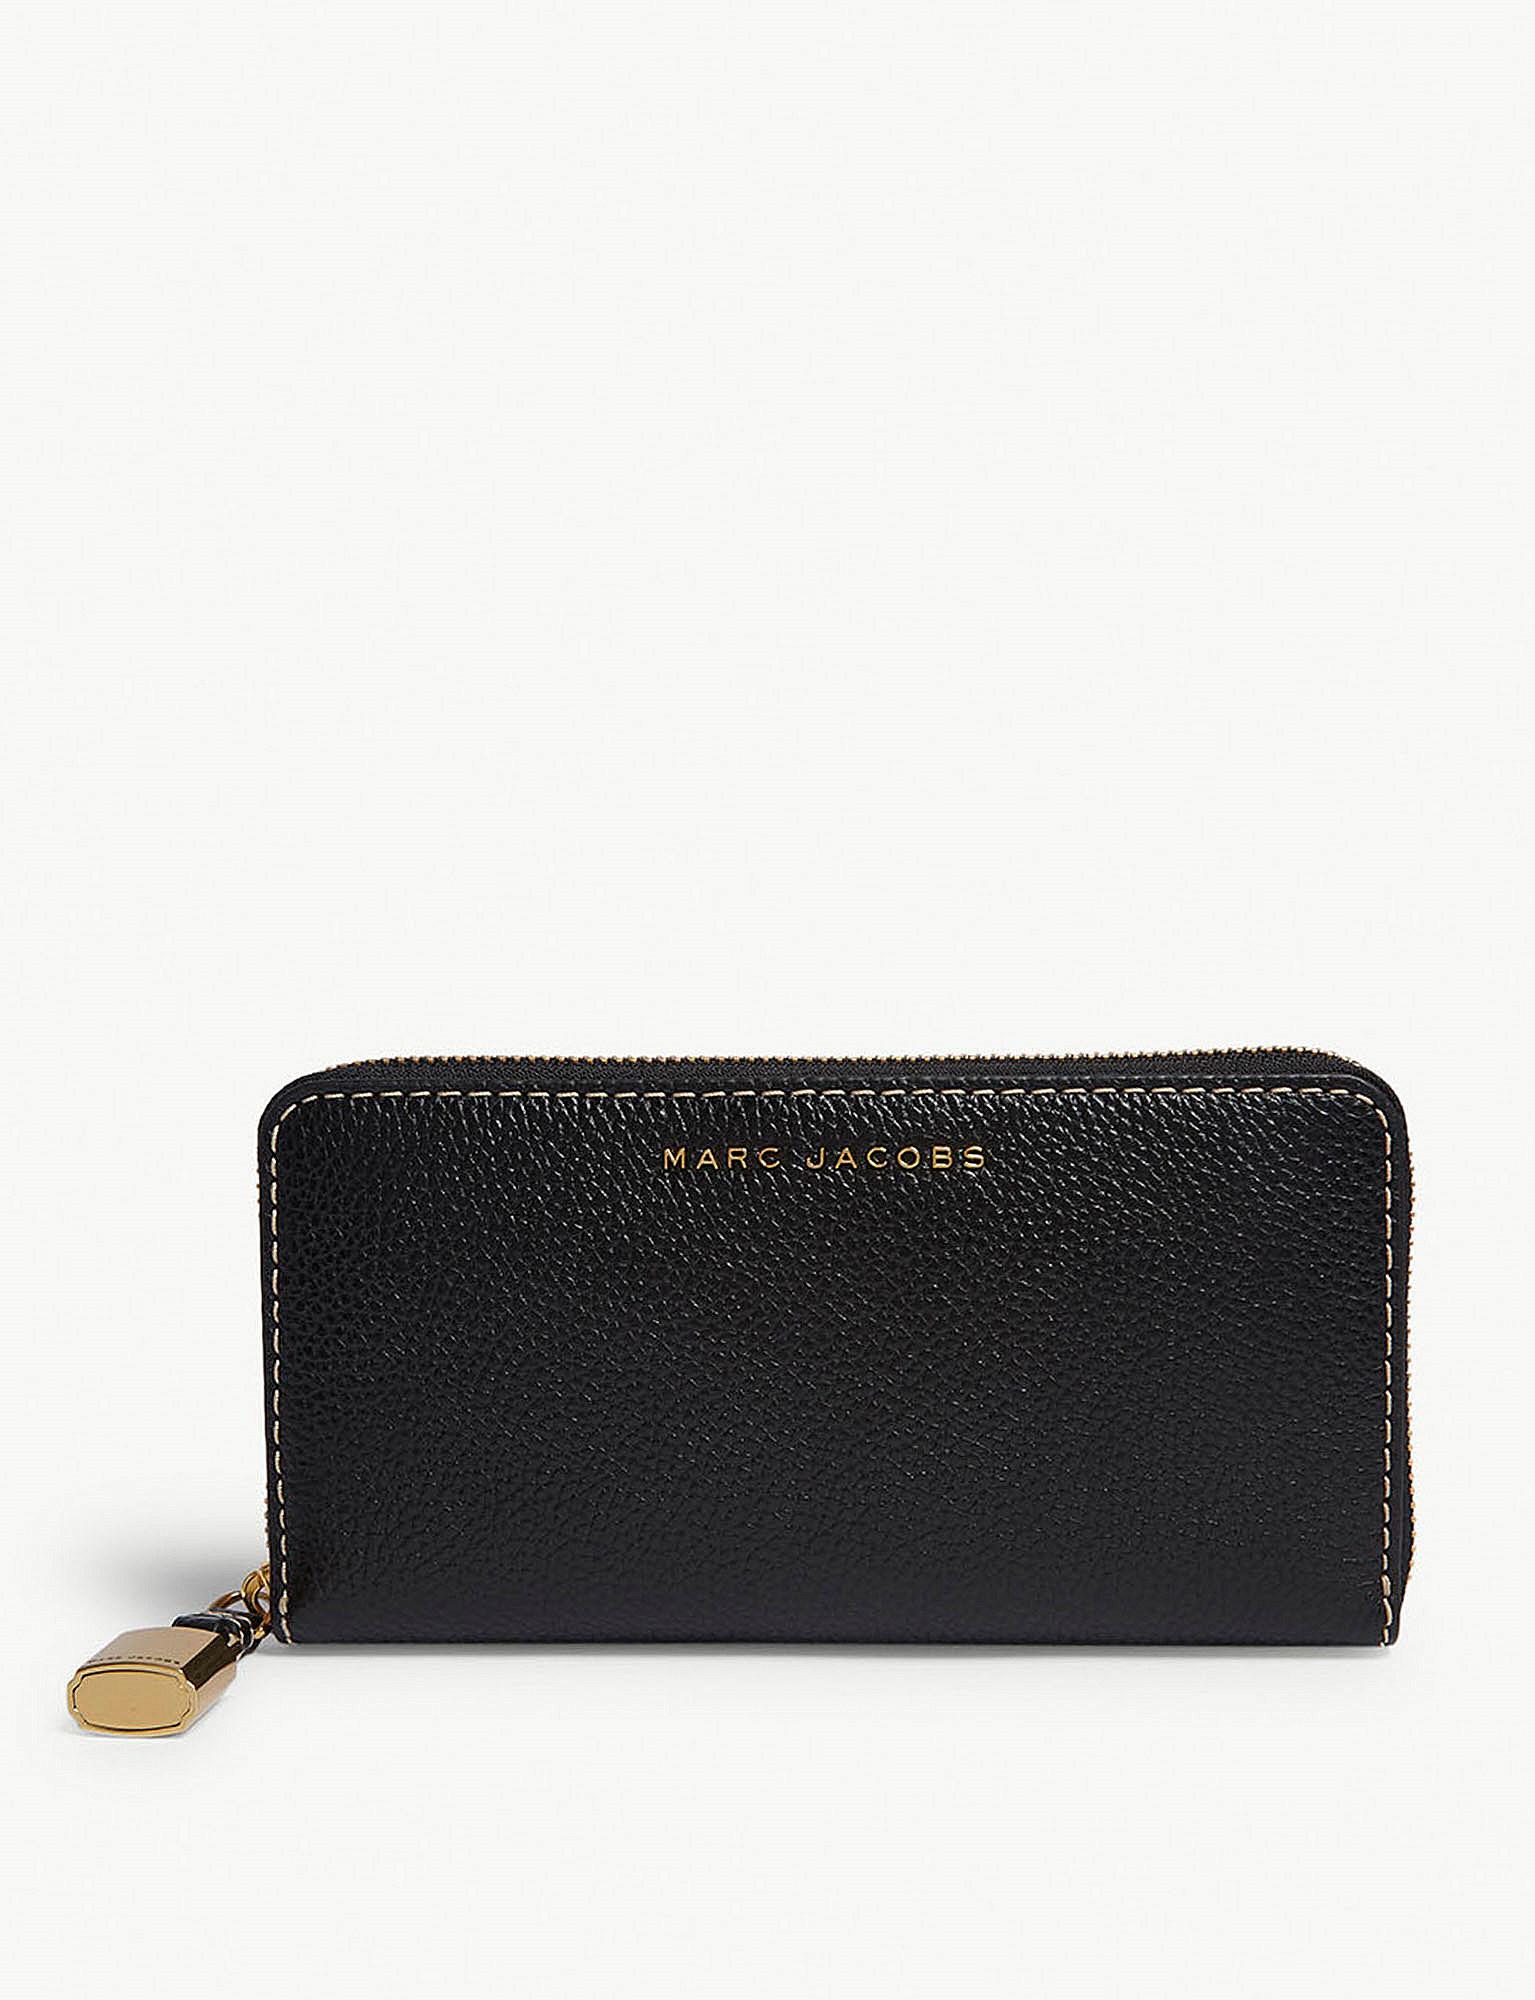 Marc Jacobs Black Grind Leather Continental Wallet - Lyst